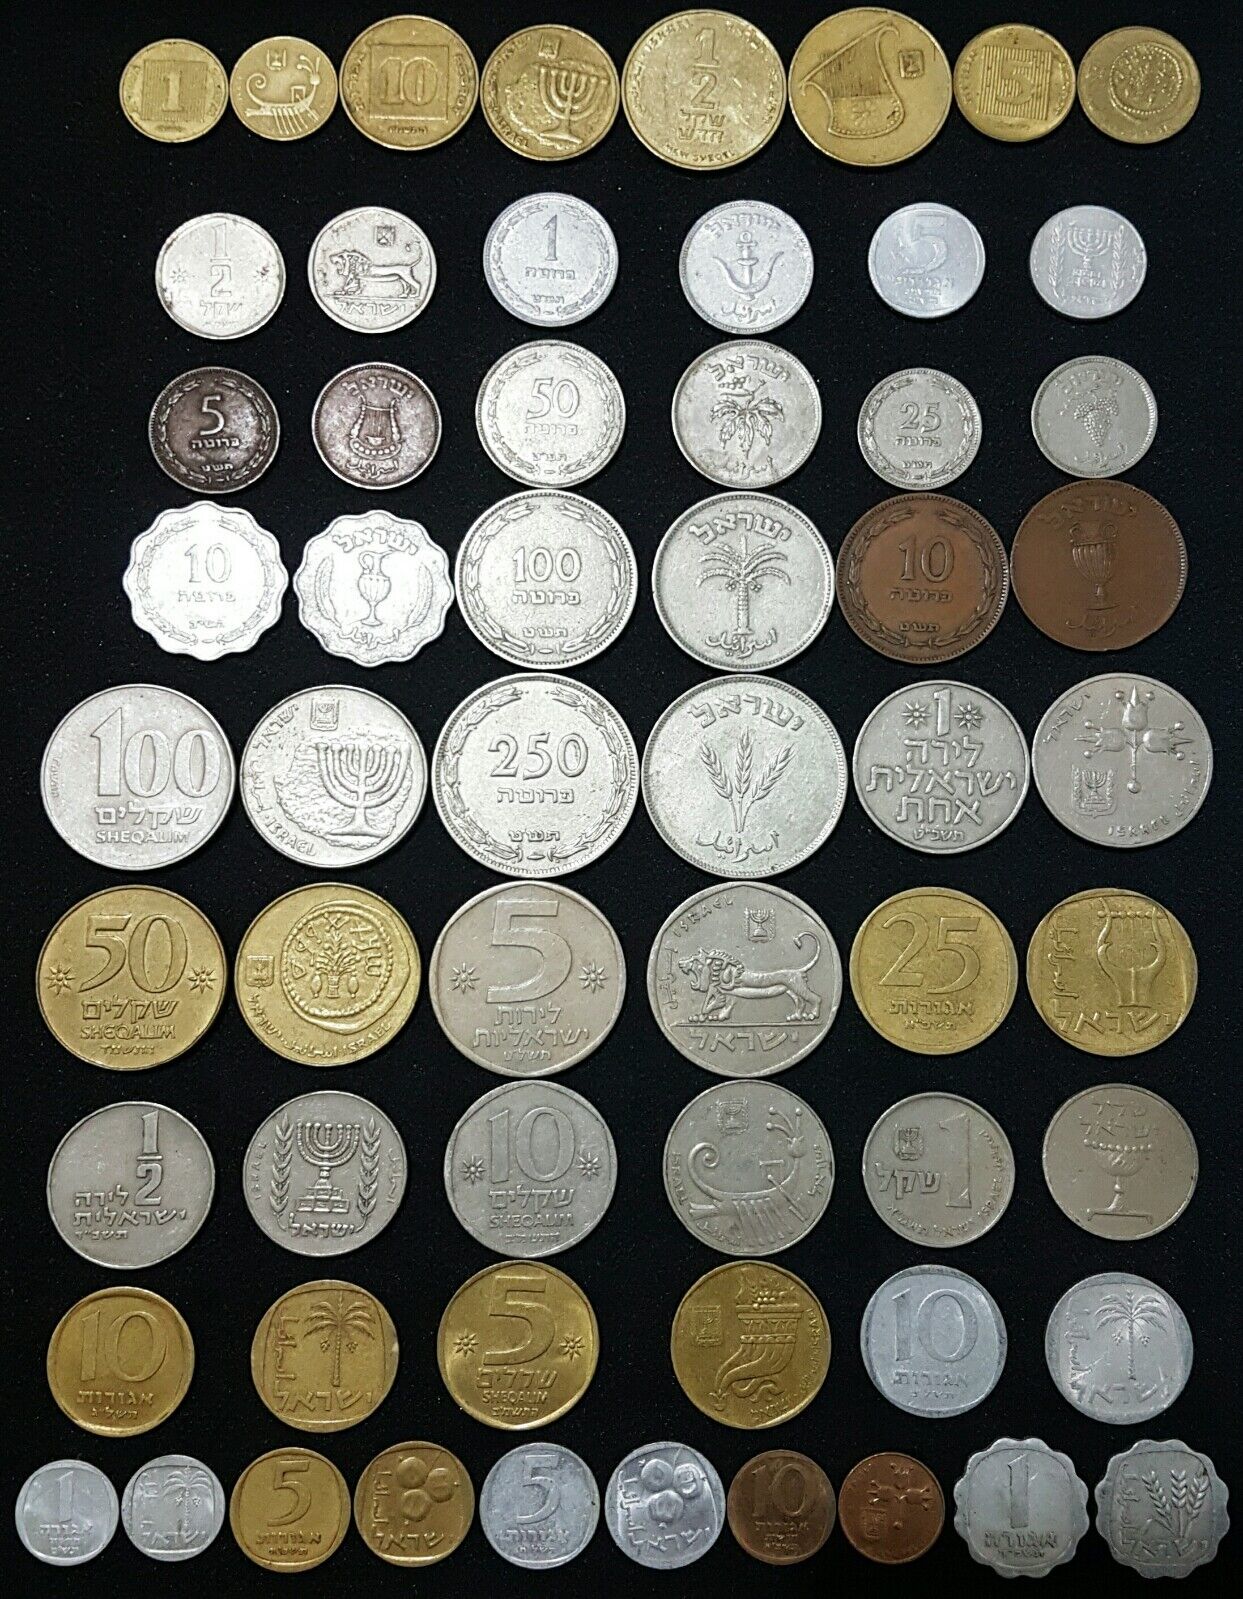 Israel Complete Set Coins Lot of 30 Coin Pruta Sheqalim Sheqel Agorot Since 1949 Без бренда